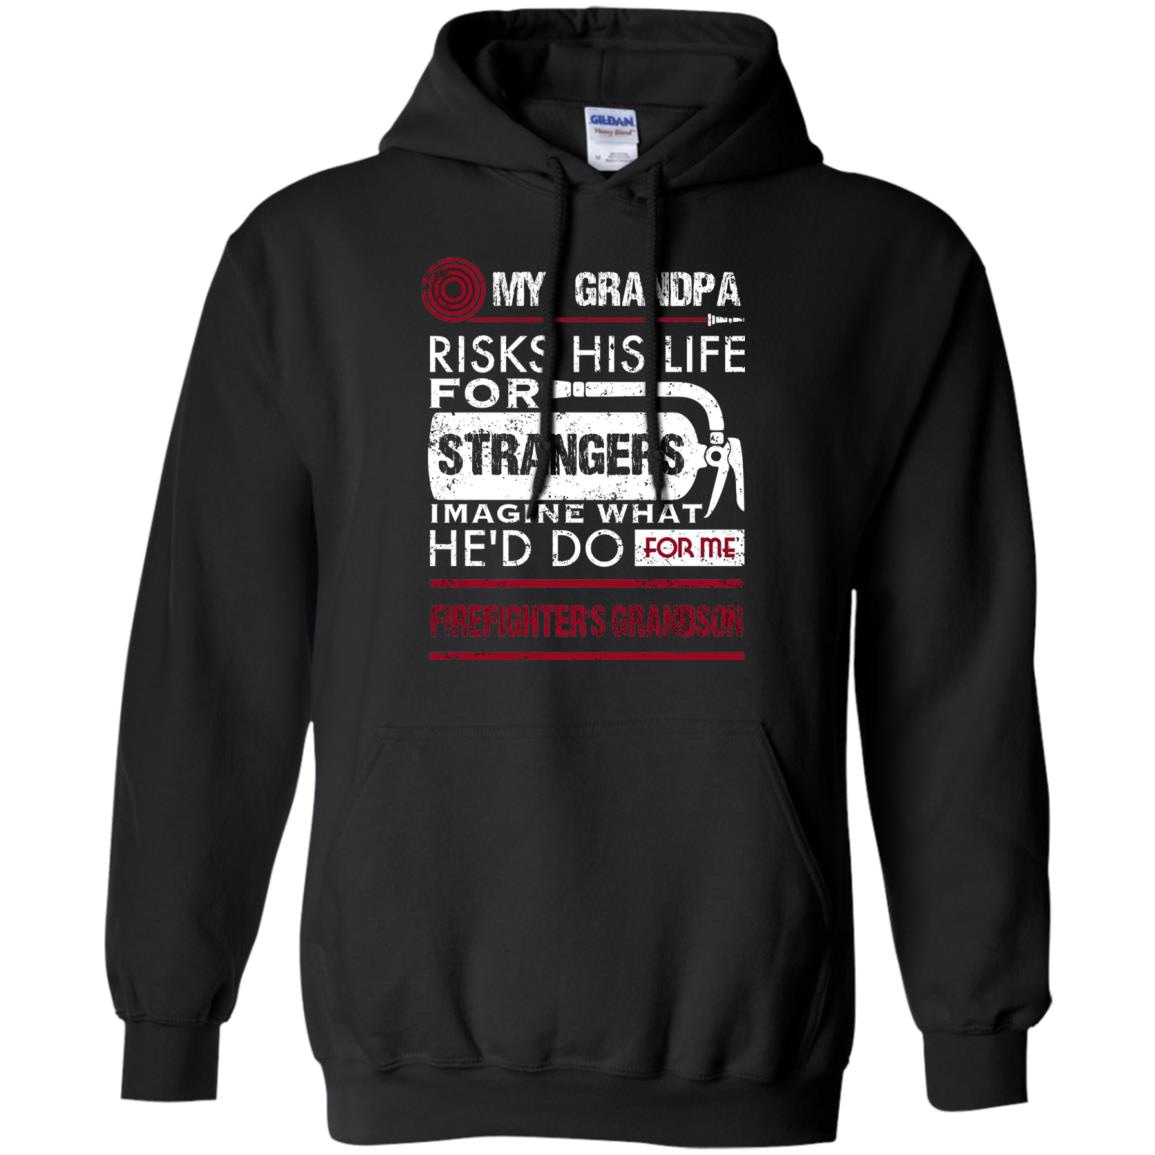 Inktee Store - Firefighters Grandson Grandpa Risks His Life For Strangers Hoodies Image